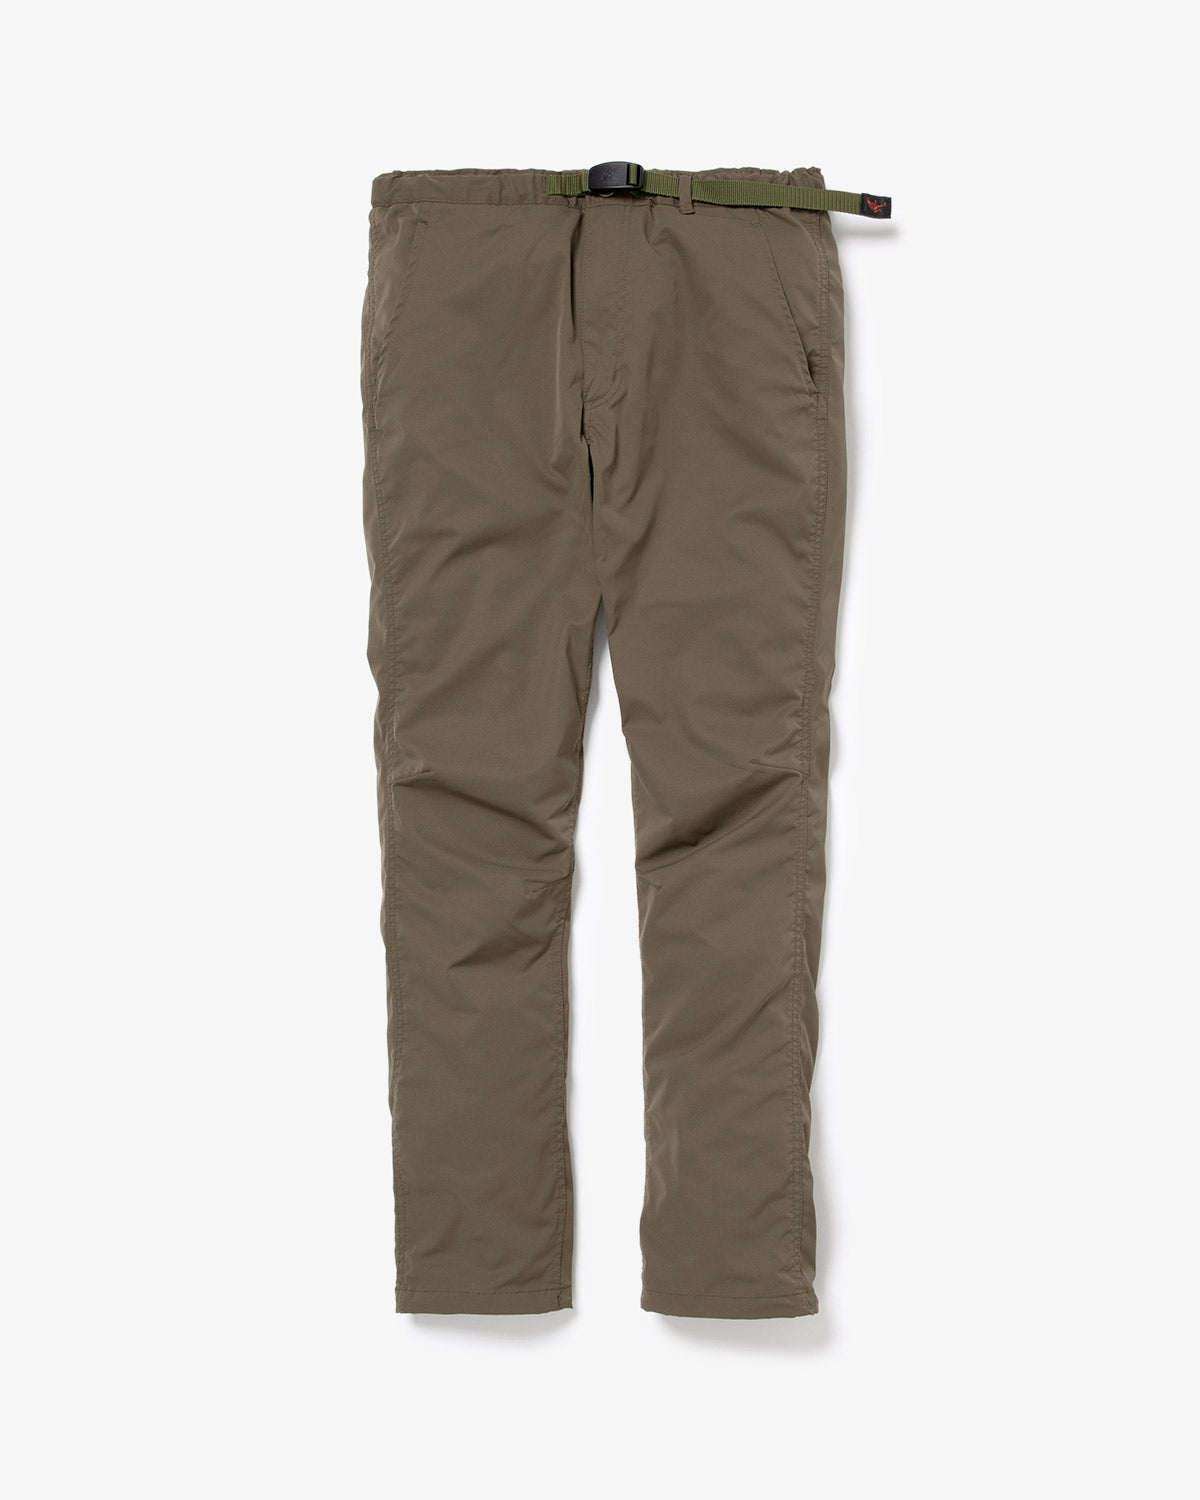 CLIMBER EASY PANTS POLY TWILL STRETCH SOLOTEX® by GRAMICCI